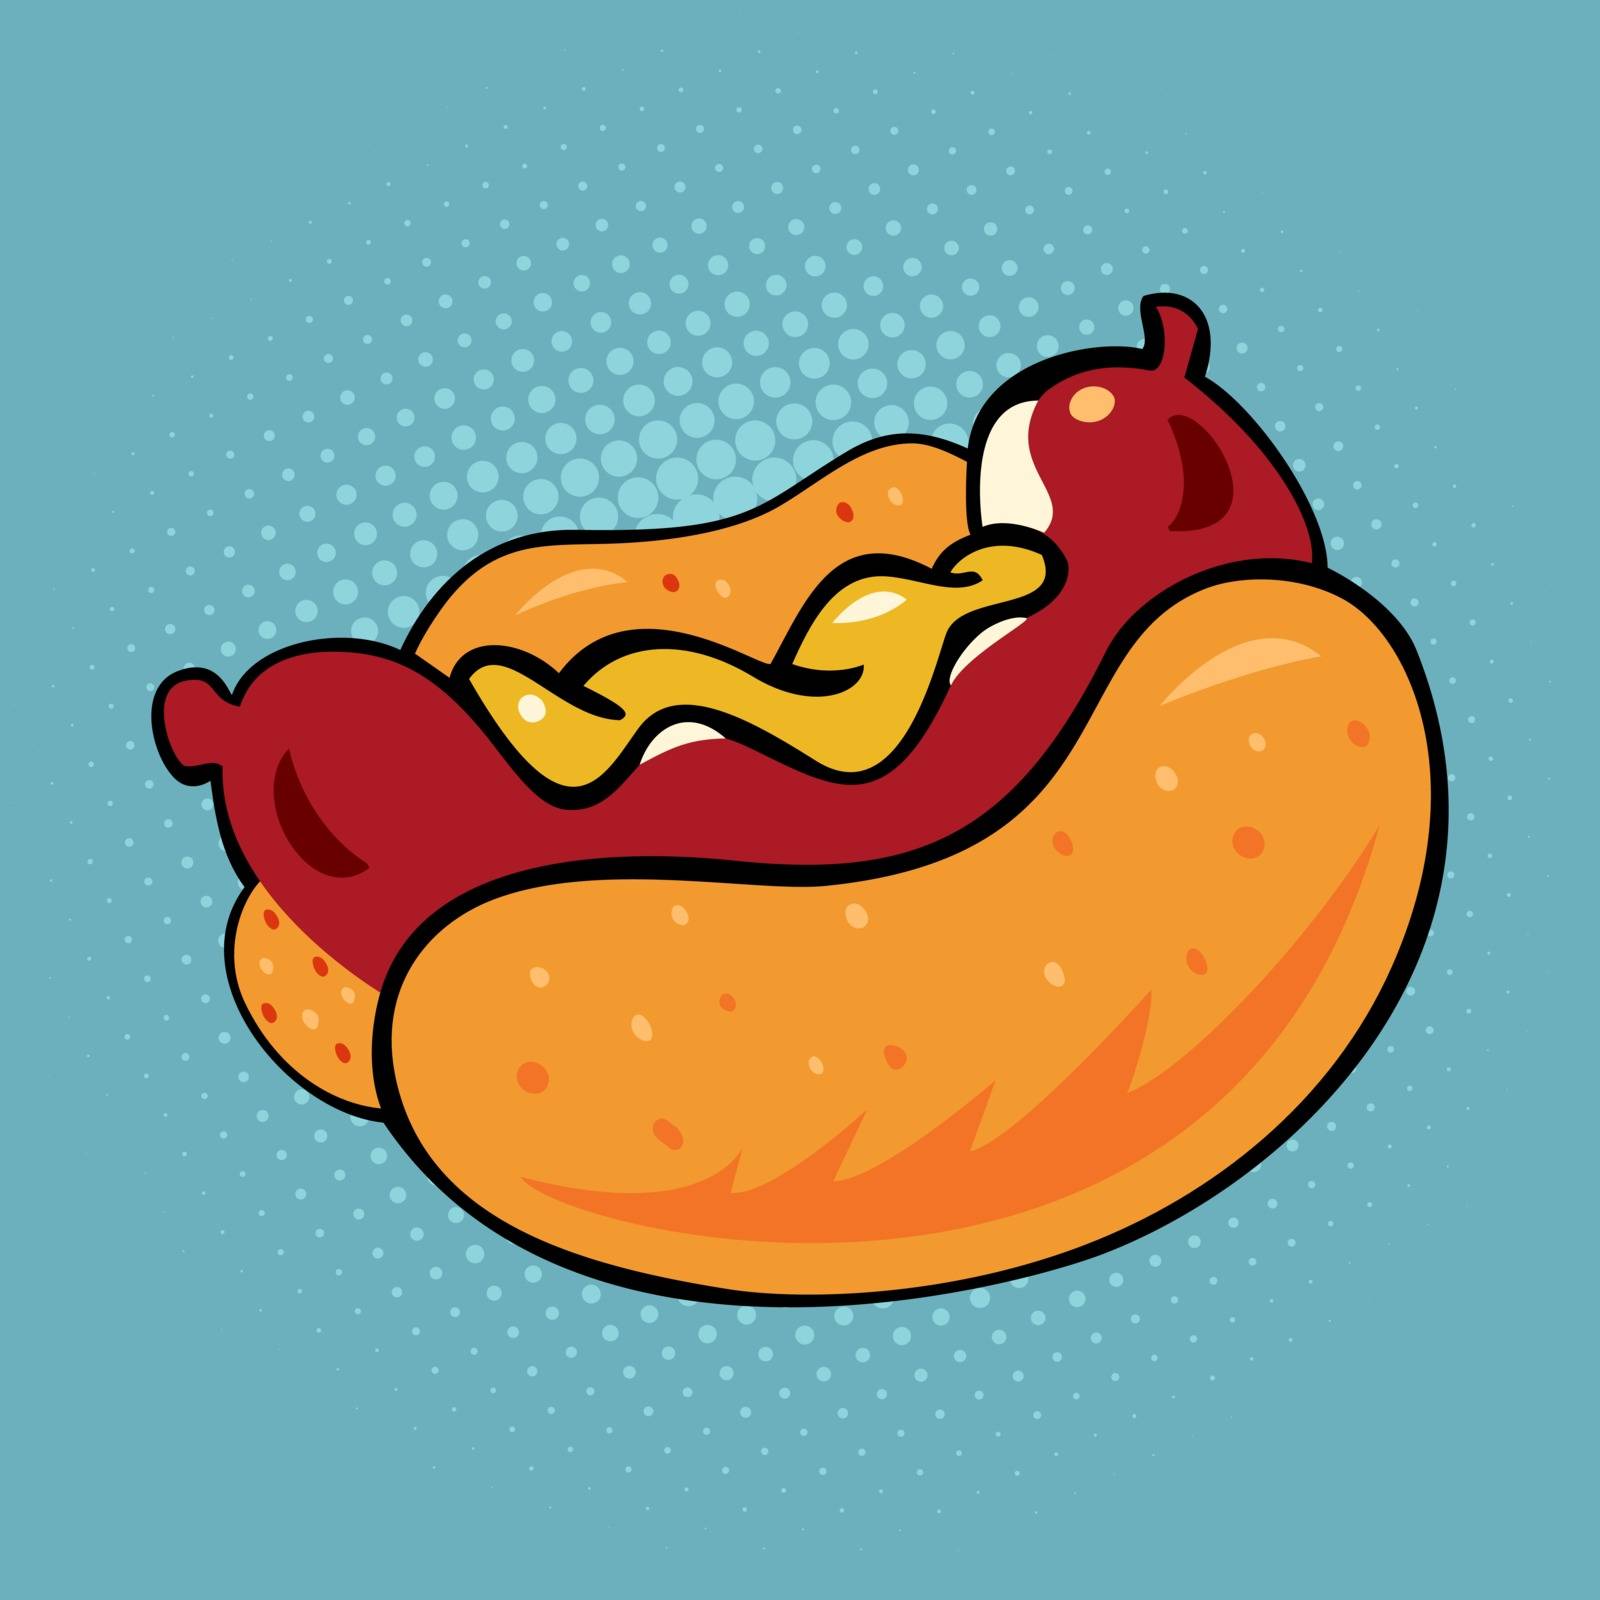 Hot dog fast food vector pop art retro style. Restaurants and street food. Sausage in the bun with mustard. Menu comic style